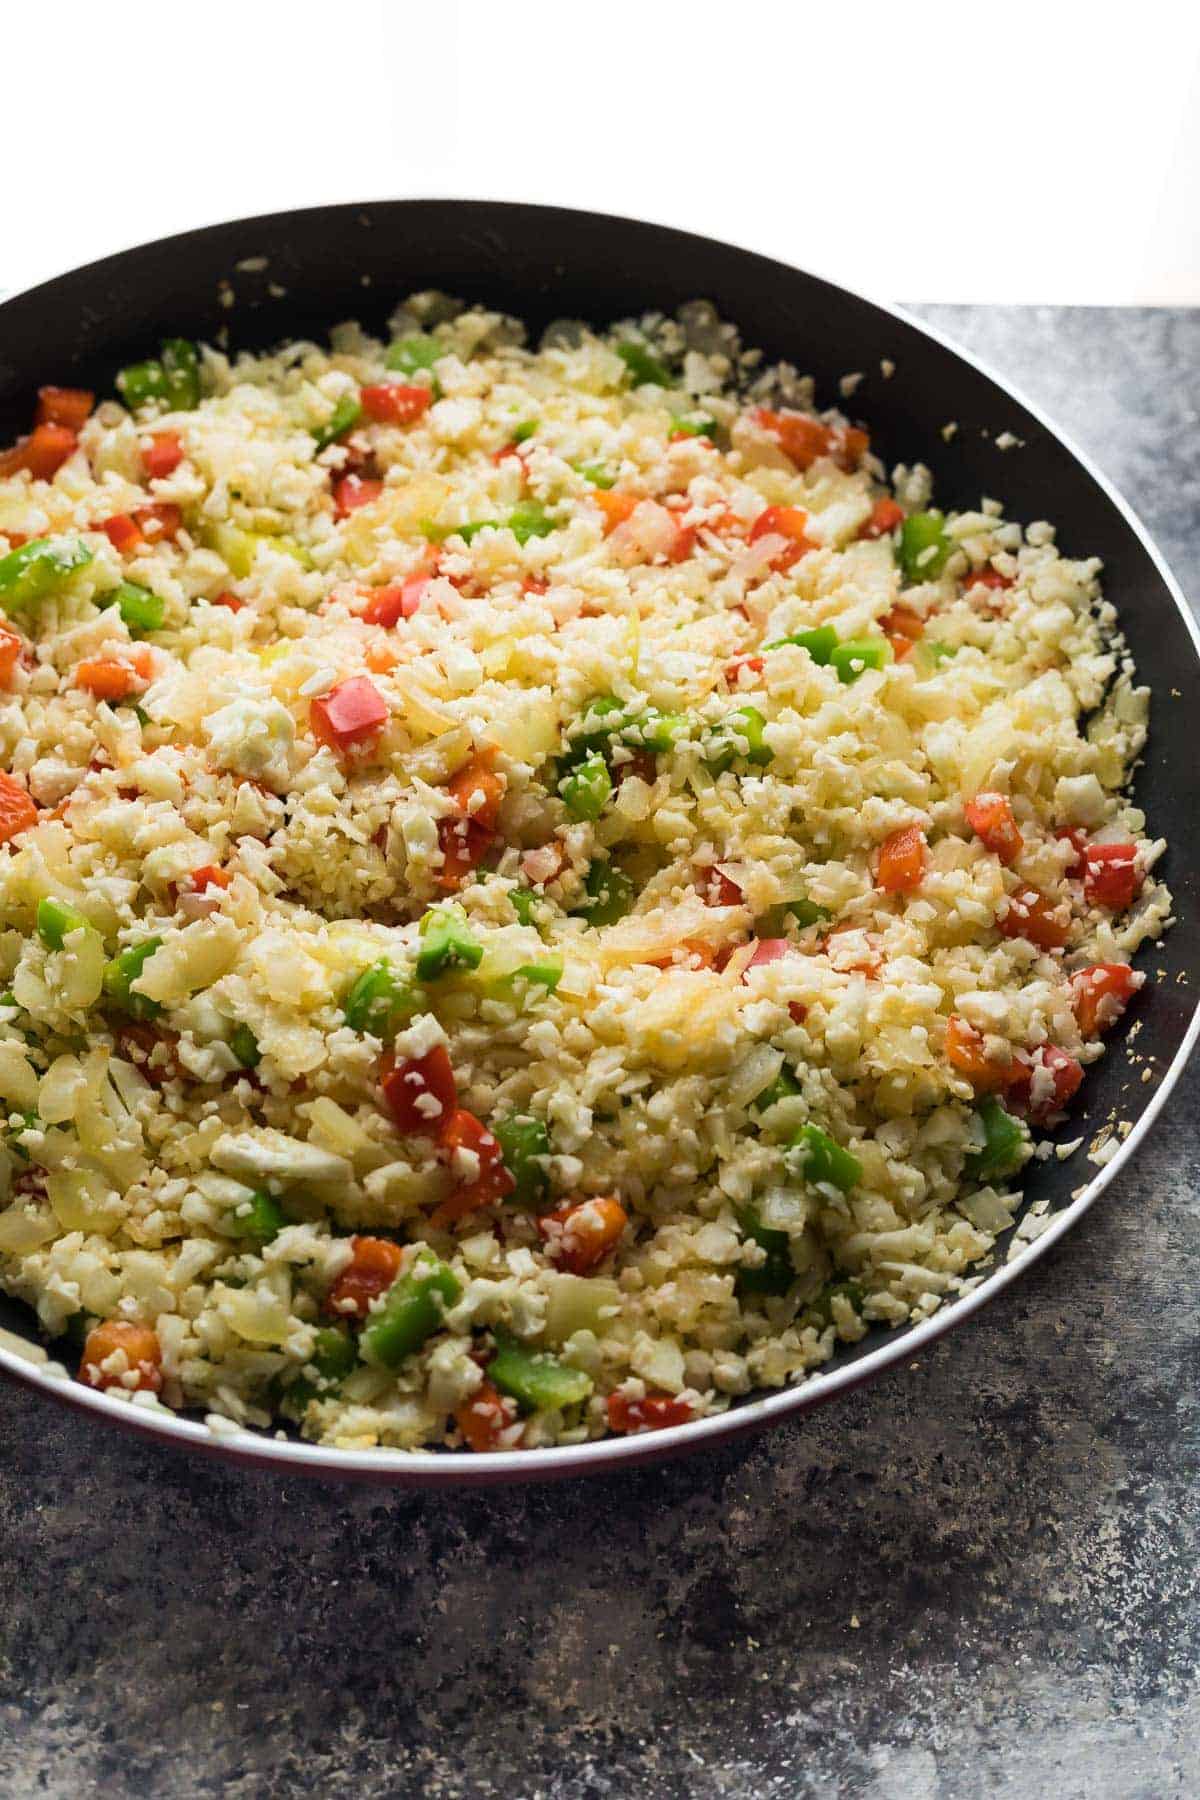 Large saute pan filled with all ingredients for cauliflower rice